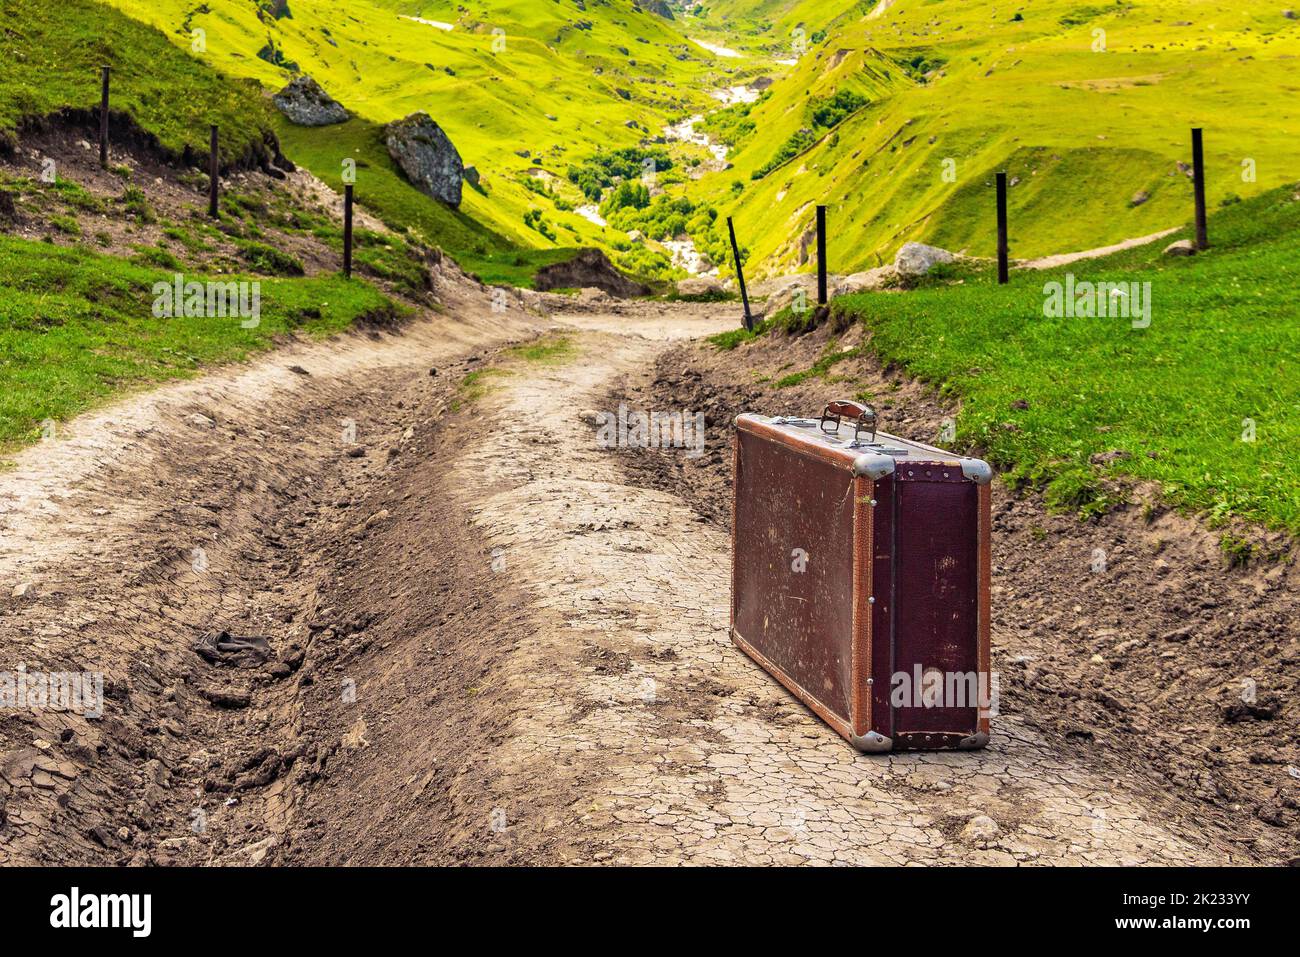 Old shabby leather suitcase on a dirt road in the mountains Stock Photo